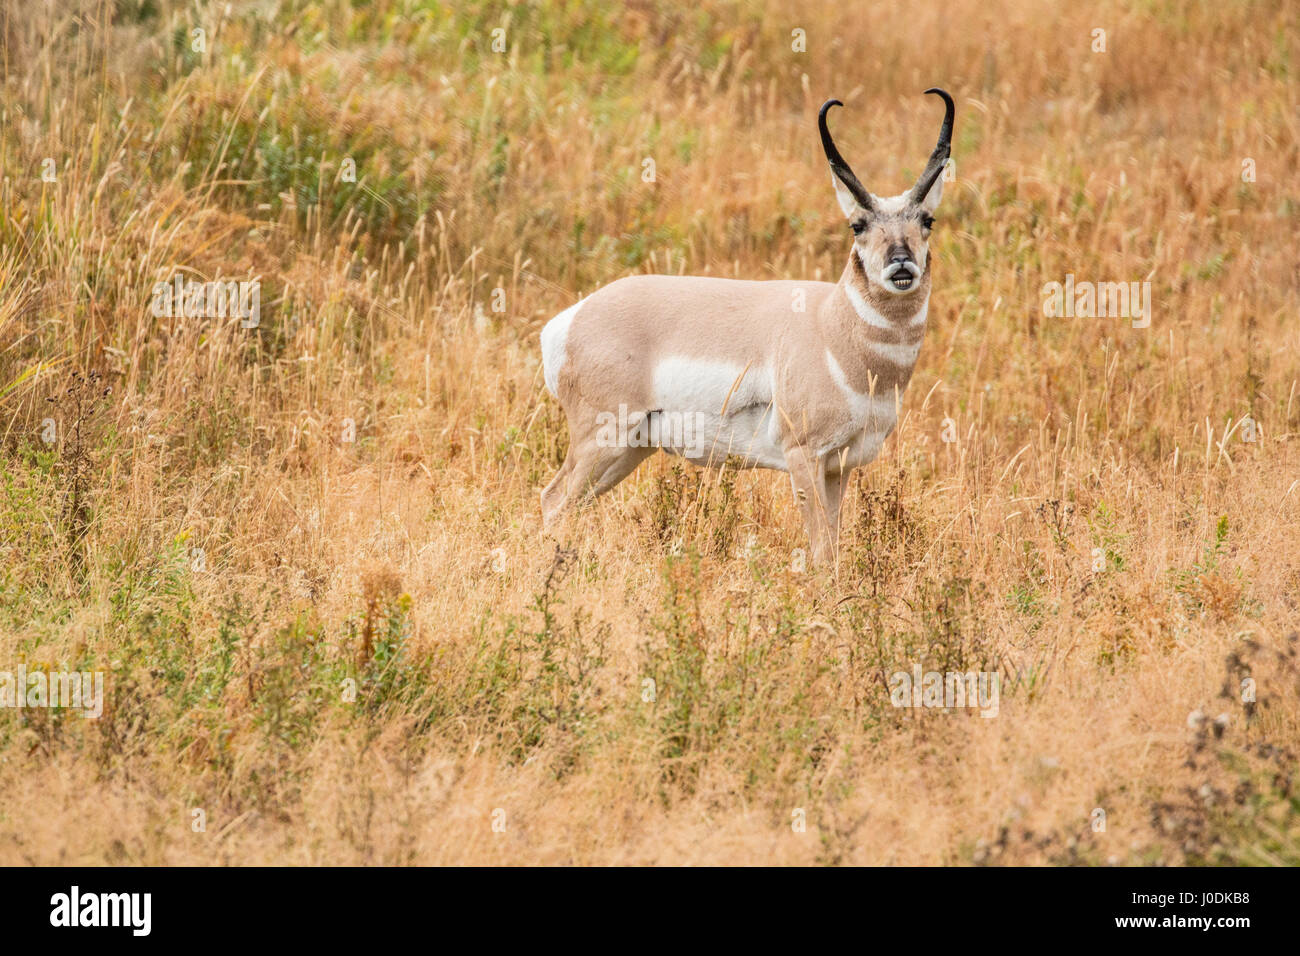 Male Pronghorn antelope vocalizing in Yellowstone National Park, Wyoming, USA Stock Photo